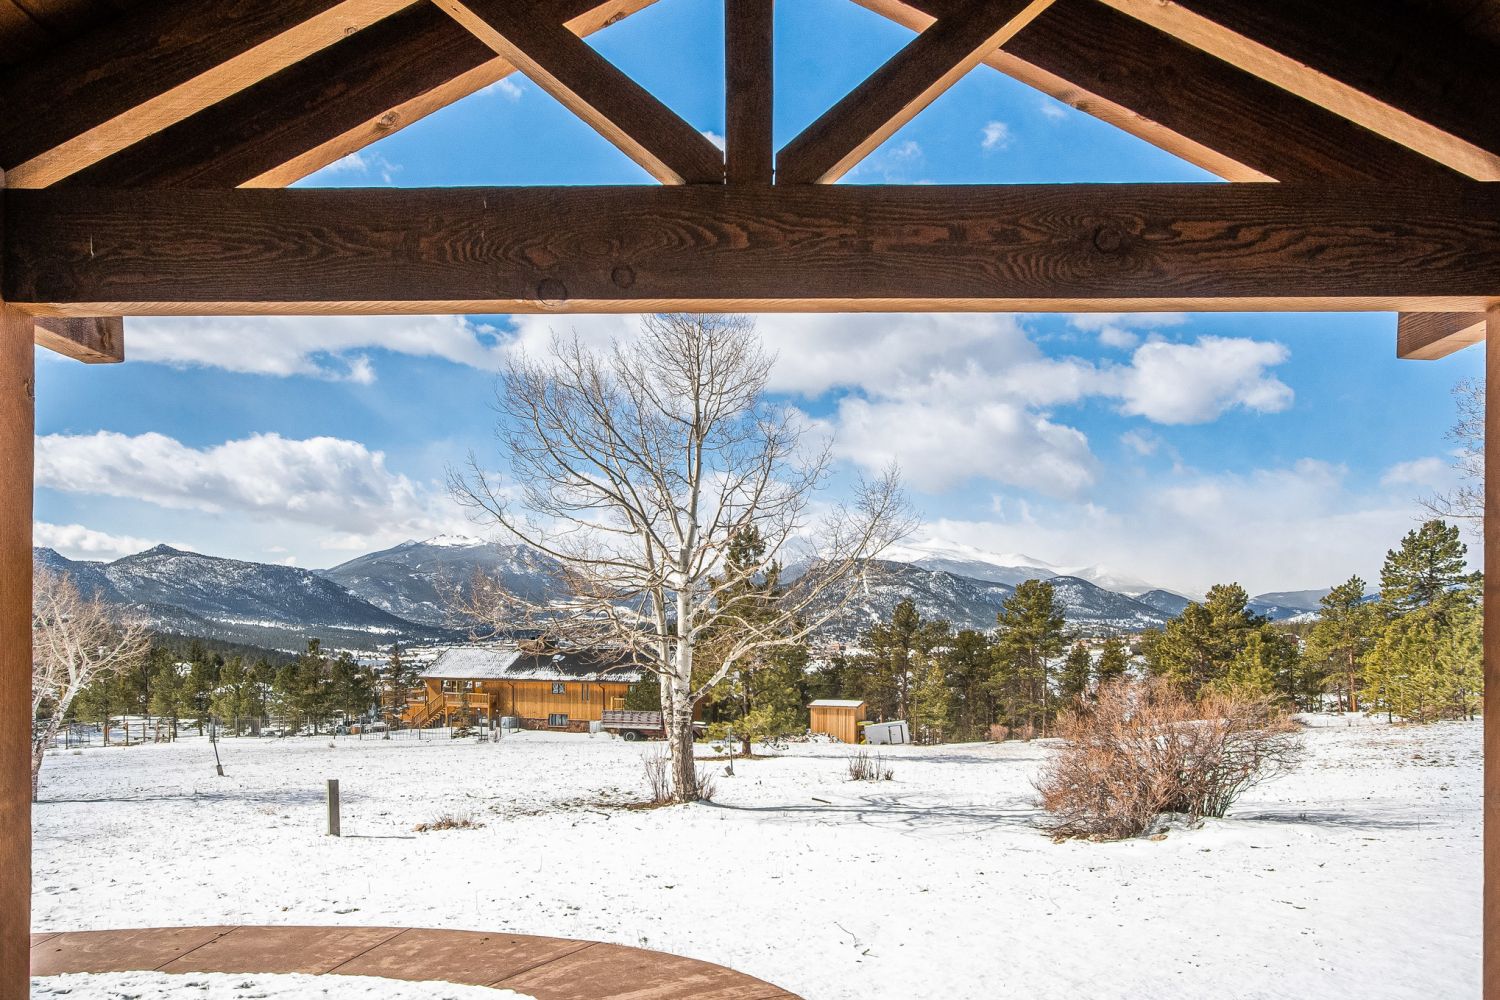 Snowline Vista Lodge - Snowline Vista Lodge Estes Park, Welcome! To this beautiful home.